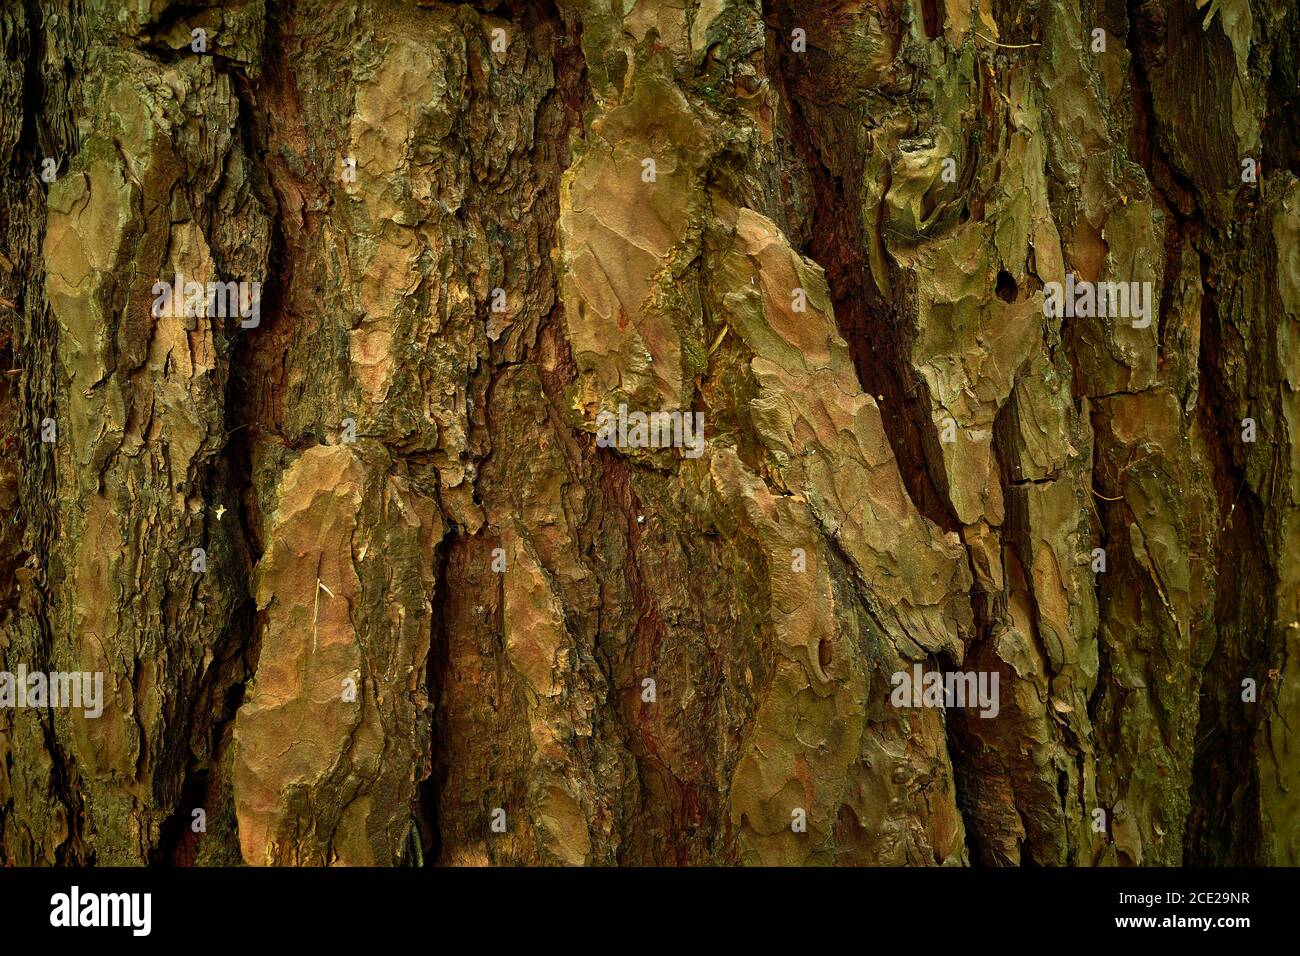 Bark of age pine tree - Pinus sylvestris, pinaceae. Close-up picture. A textured, segmented, streaked surface of evergreen tree rind Stock Photo